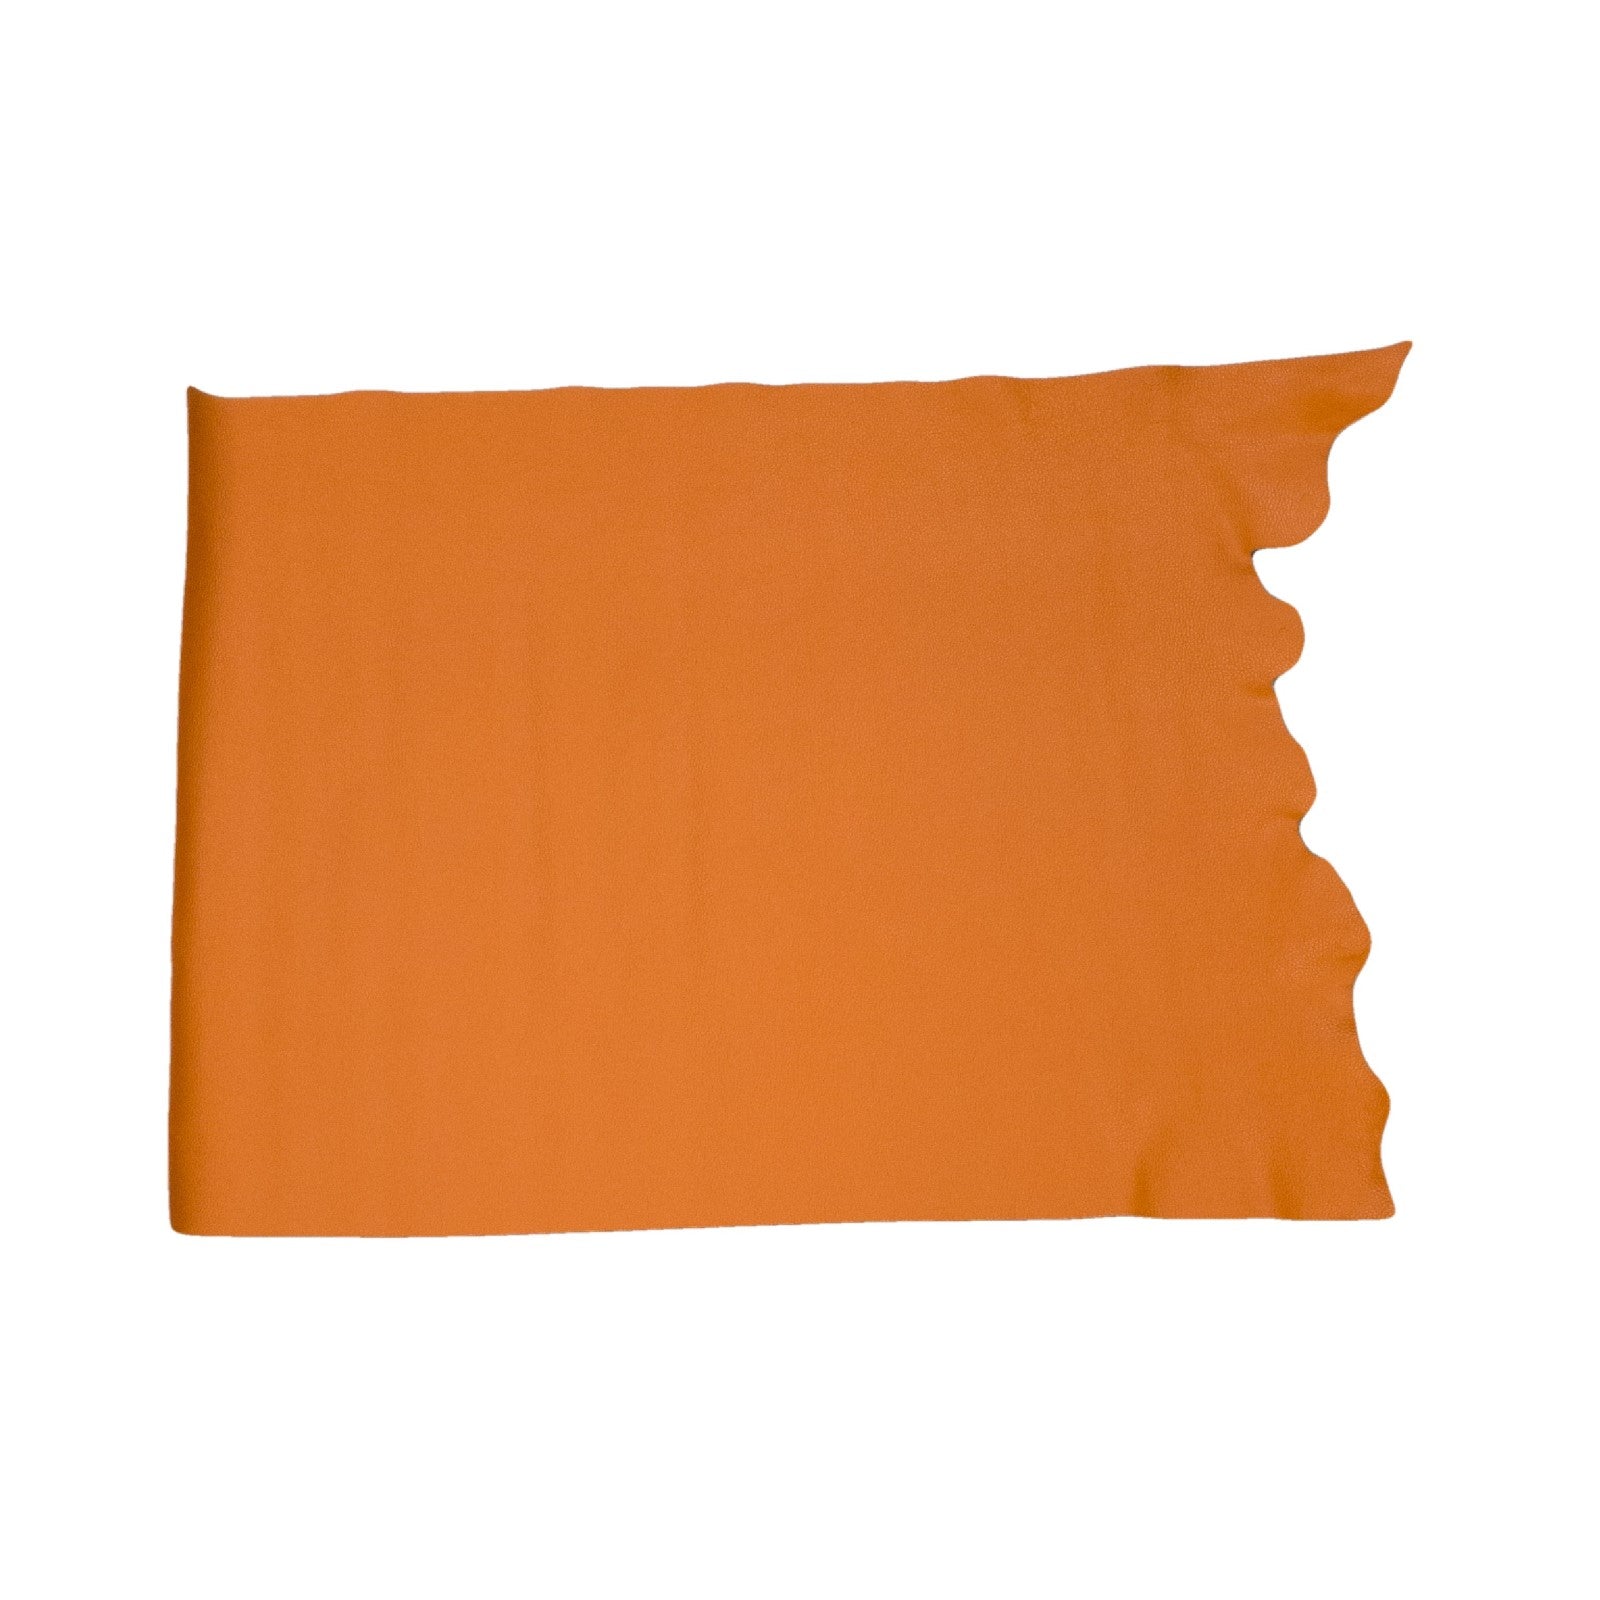 Valencia Orange, 3-4 oz Cow Hides, Tried n True, Middle Piece / 6.5-7.5 Square Foot | The Leather Guy